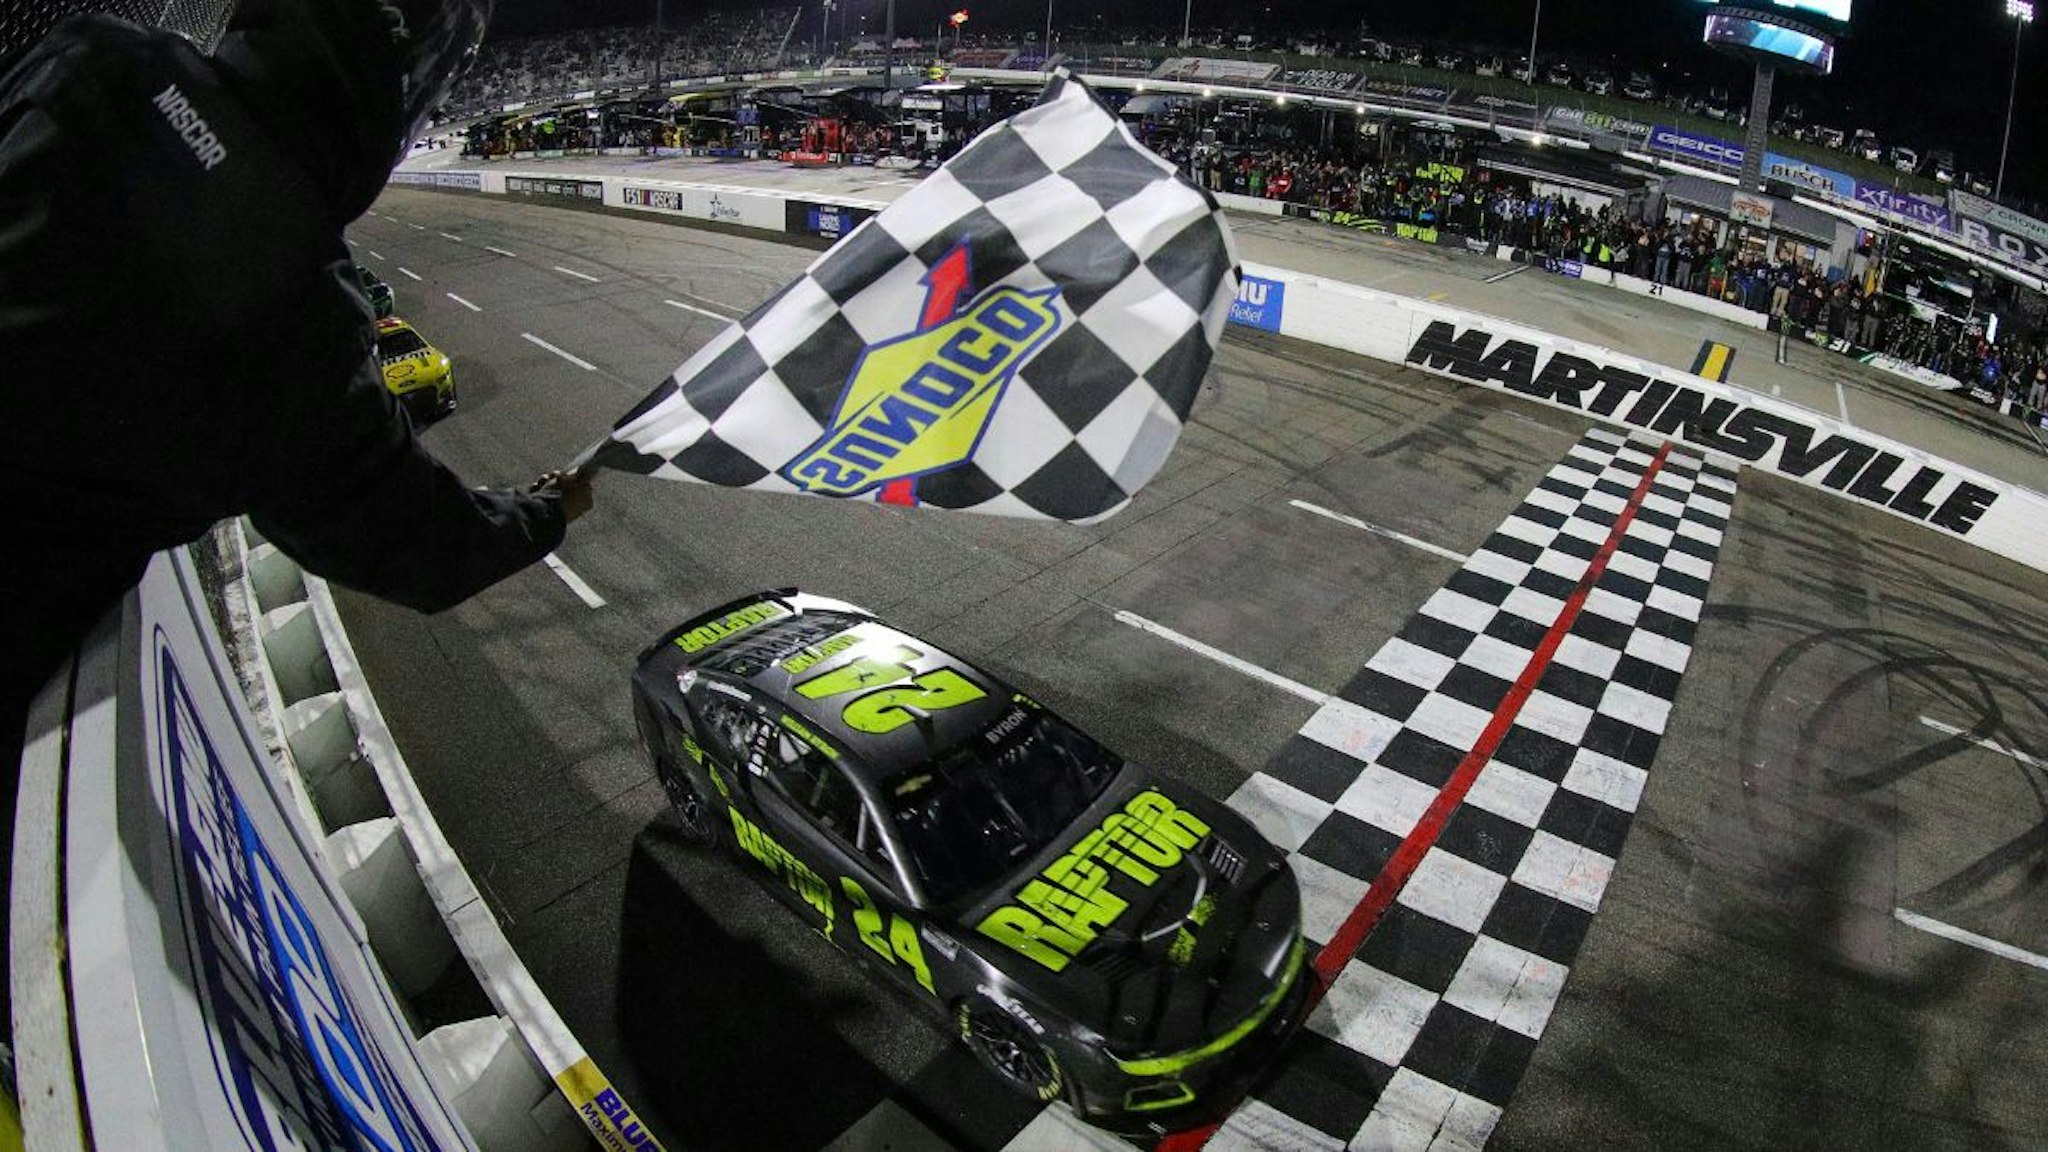 William Byron, driver of the #24 RaptorTough.com Chevrolet, takes the checkered flag to win the NASCAR Cup Series Blue-Emu Maximum Pain Relief 400 at Martinsville Speedway on April 09, 2022 in Martinsville, Virginia.